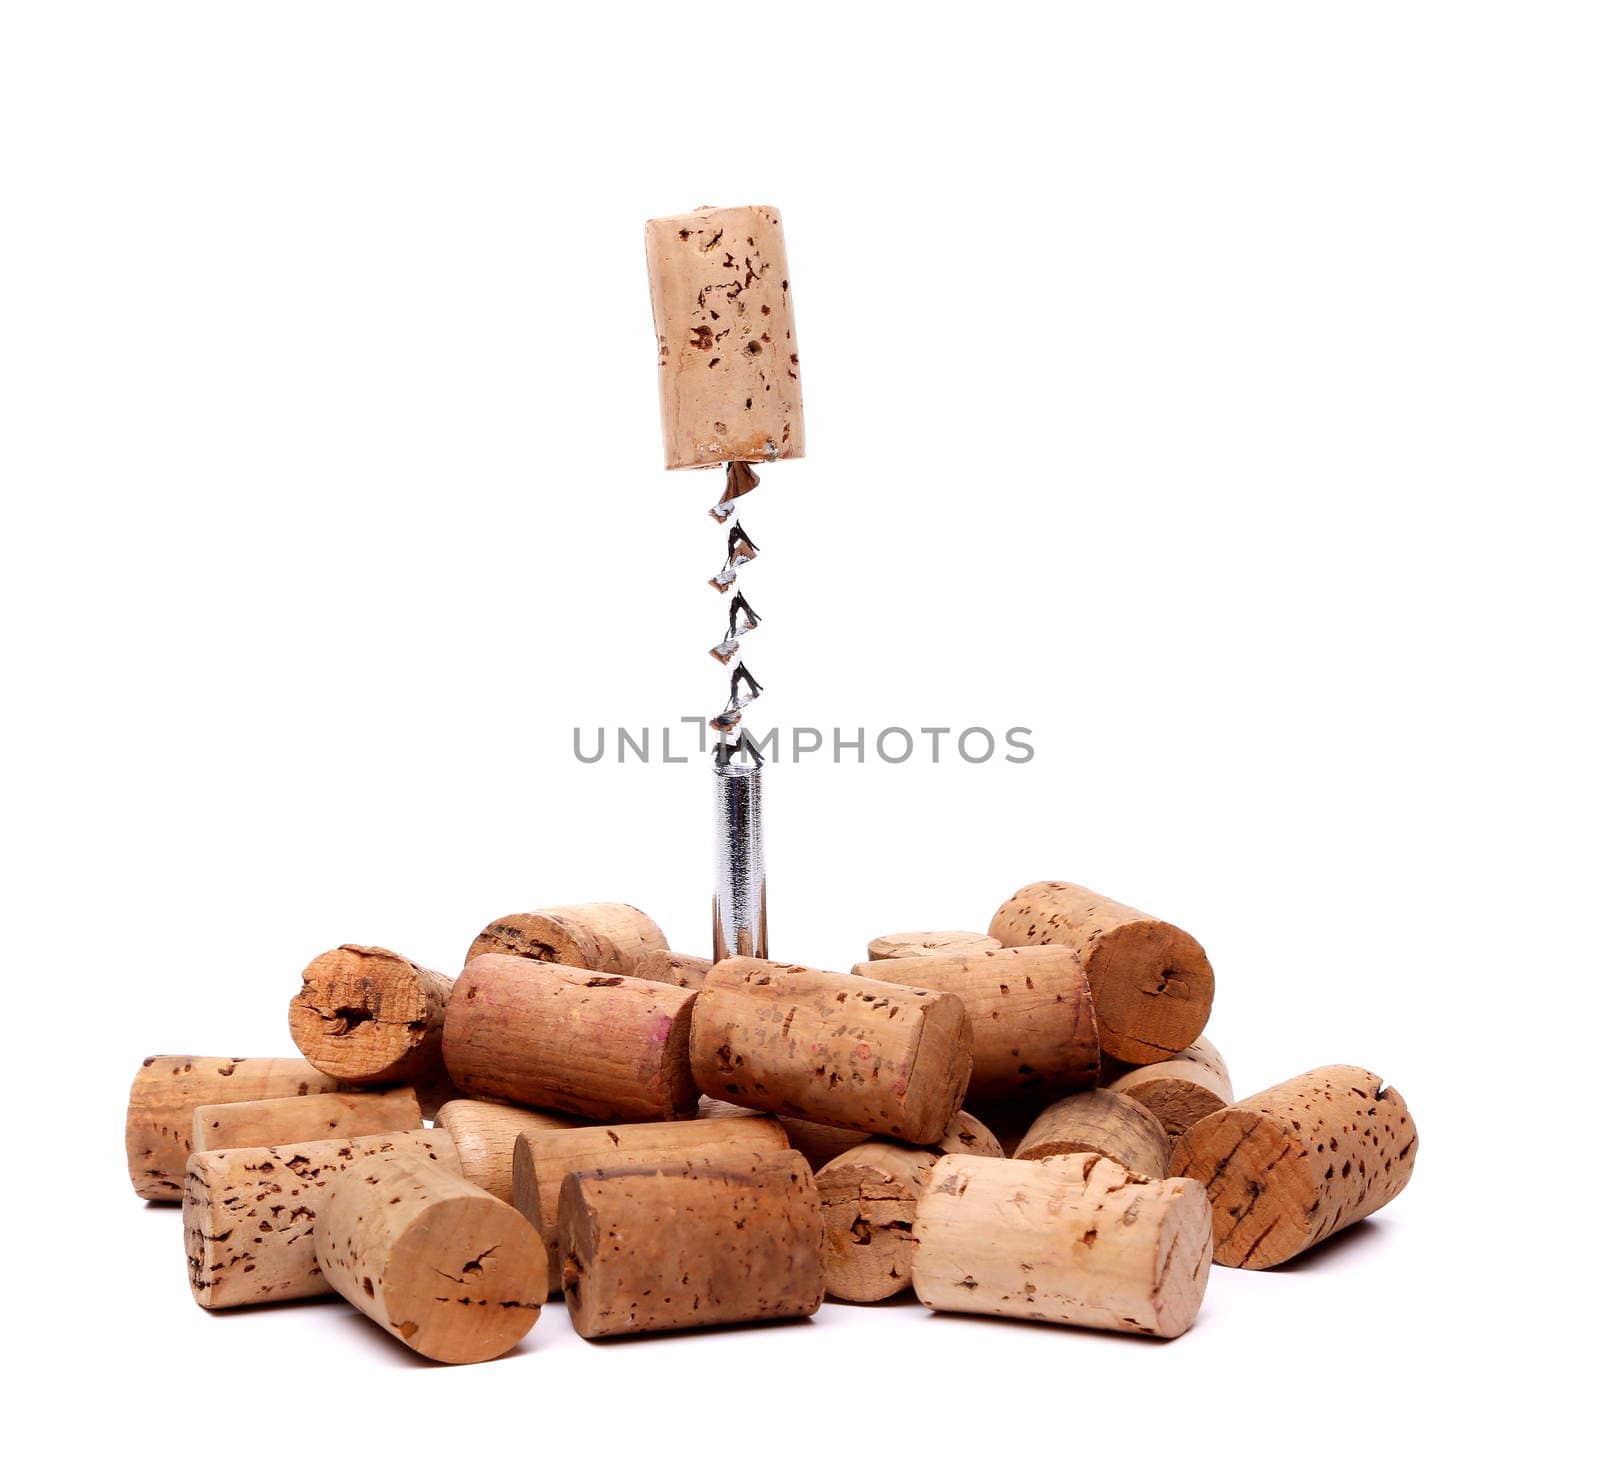 Corkscrew and wine corks on a white background